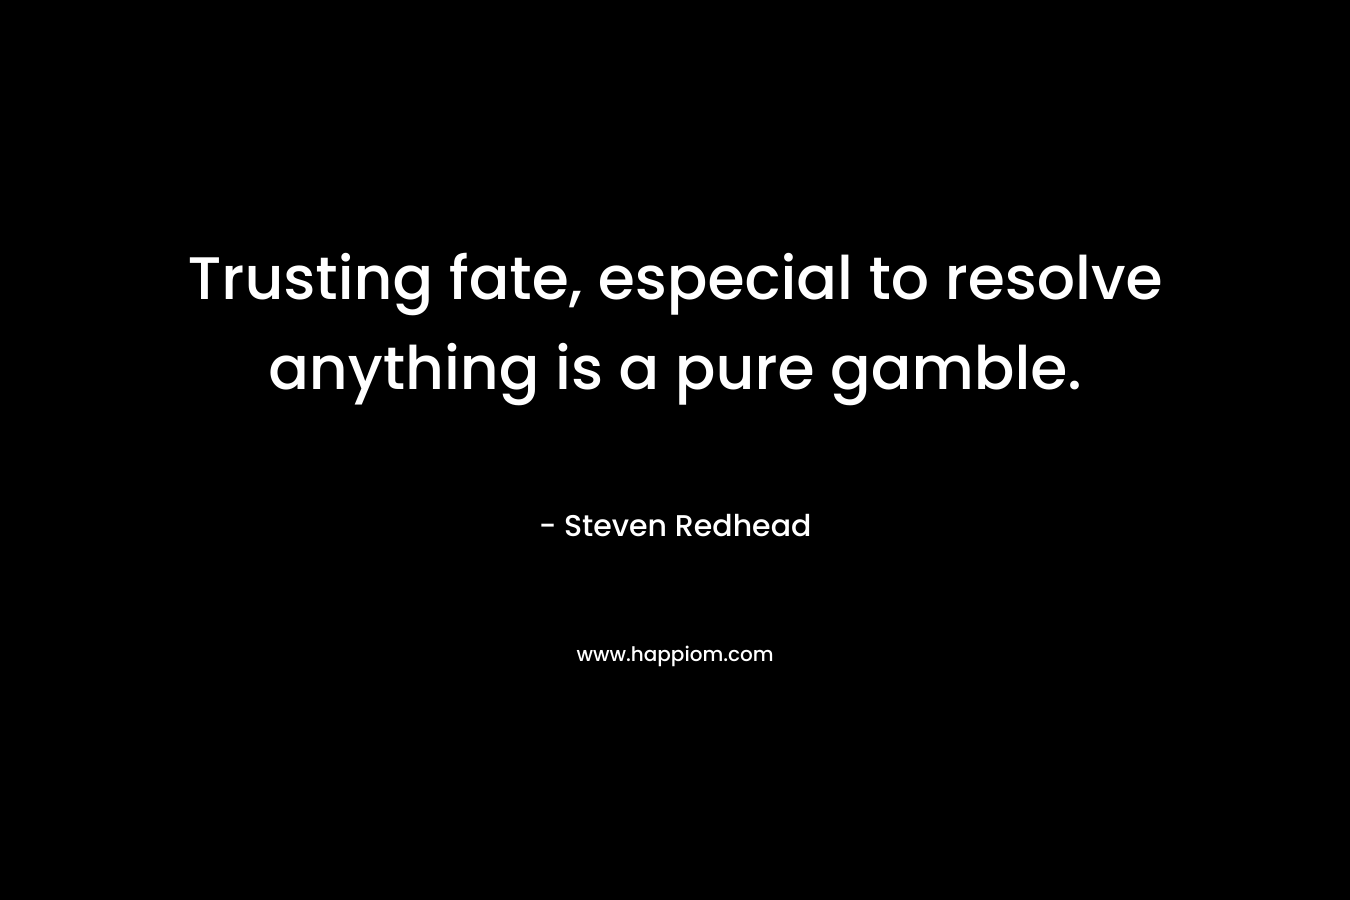 Trusting fate, especial to resolve anything is a pure gamble.